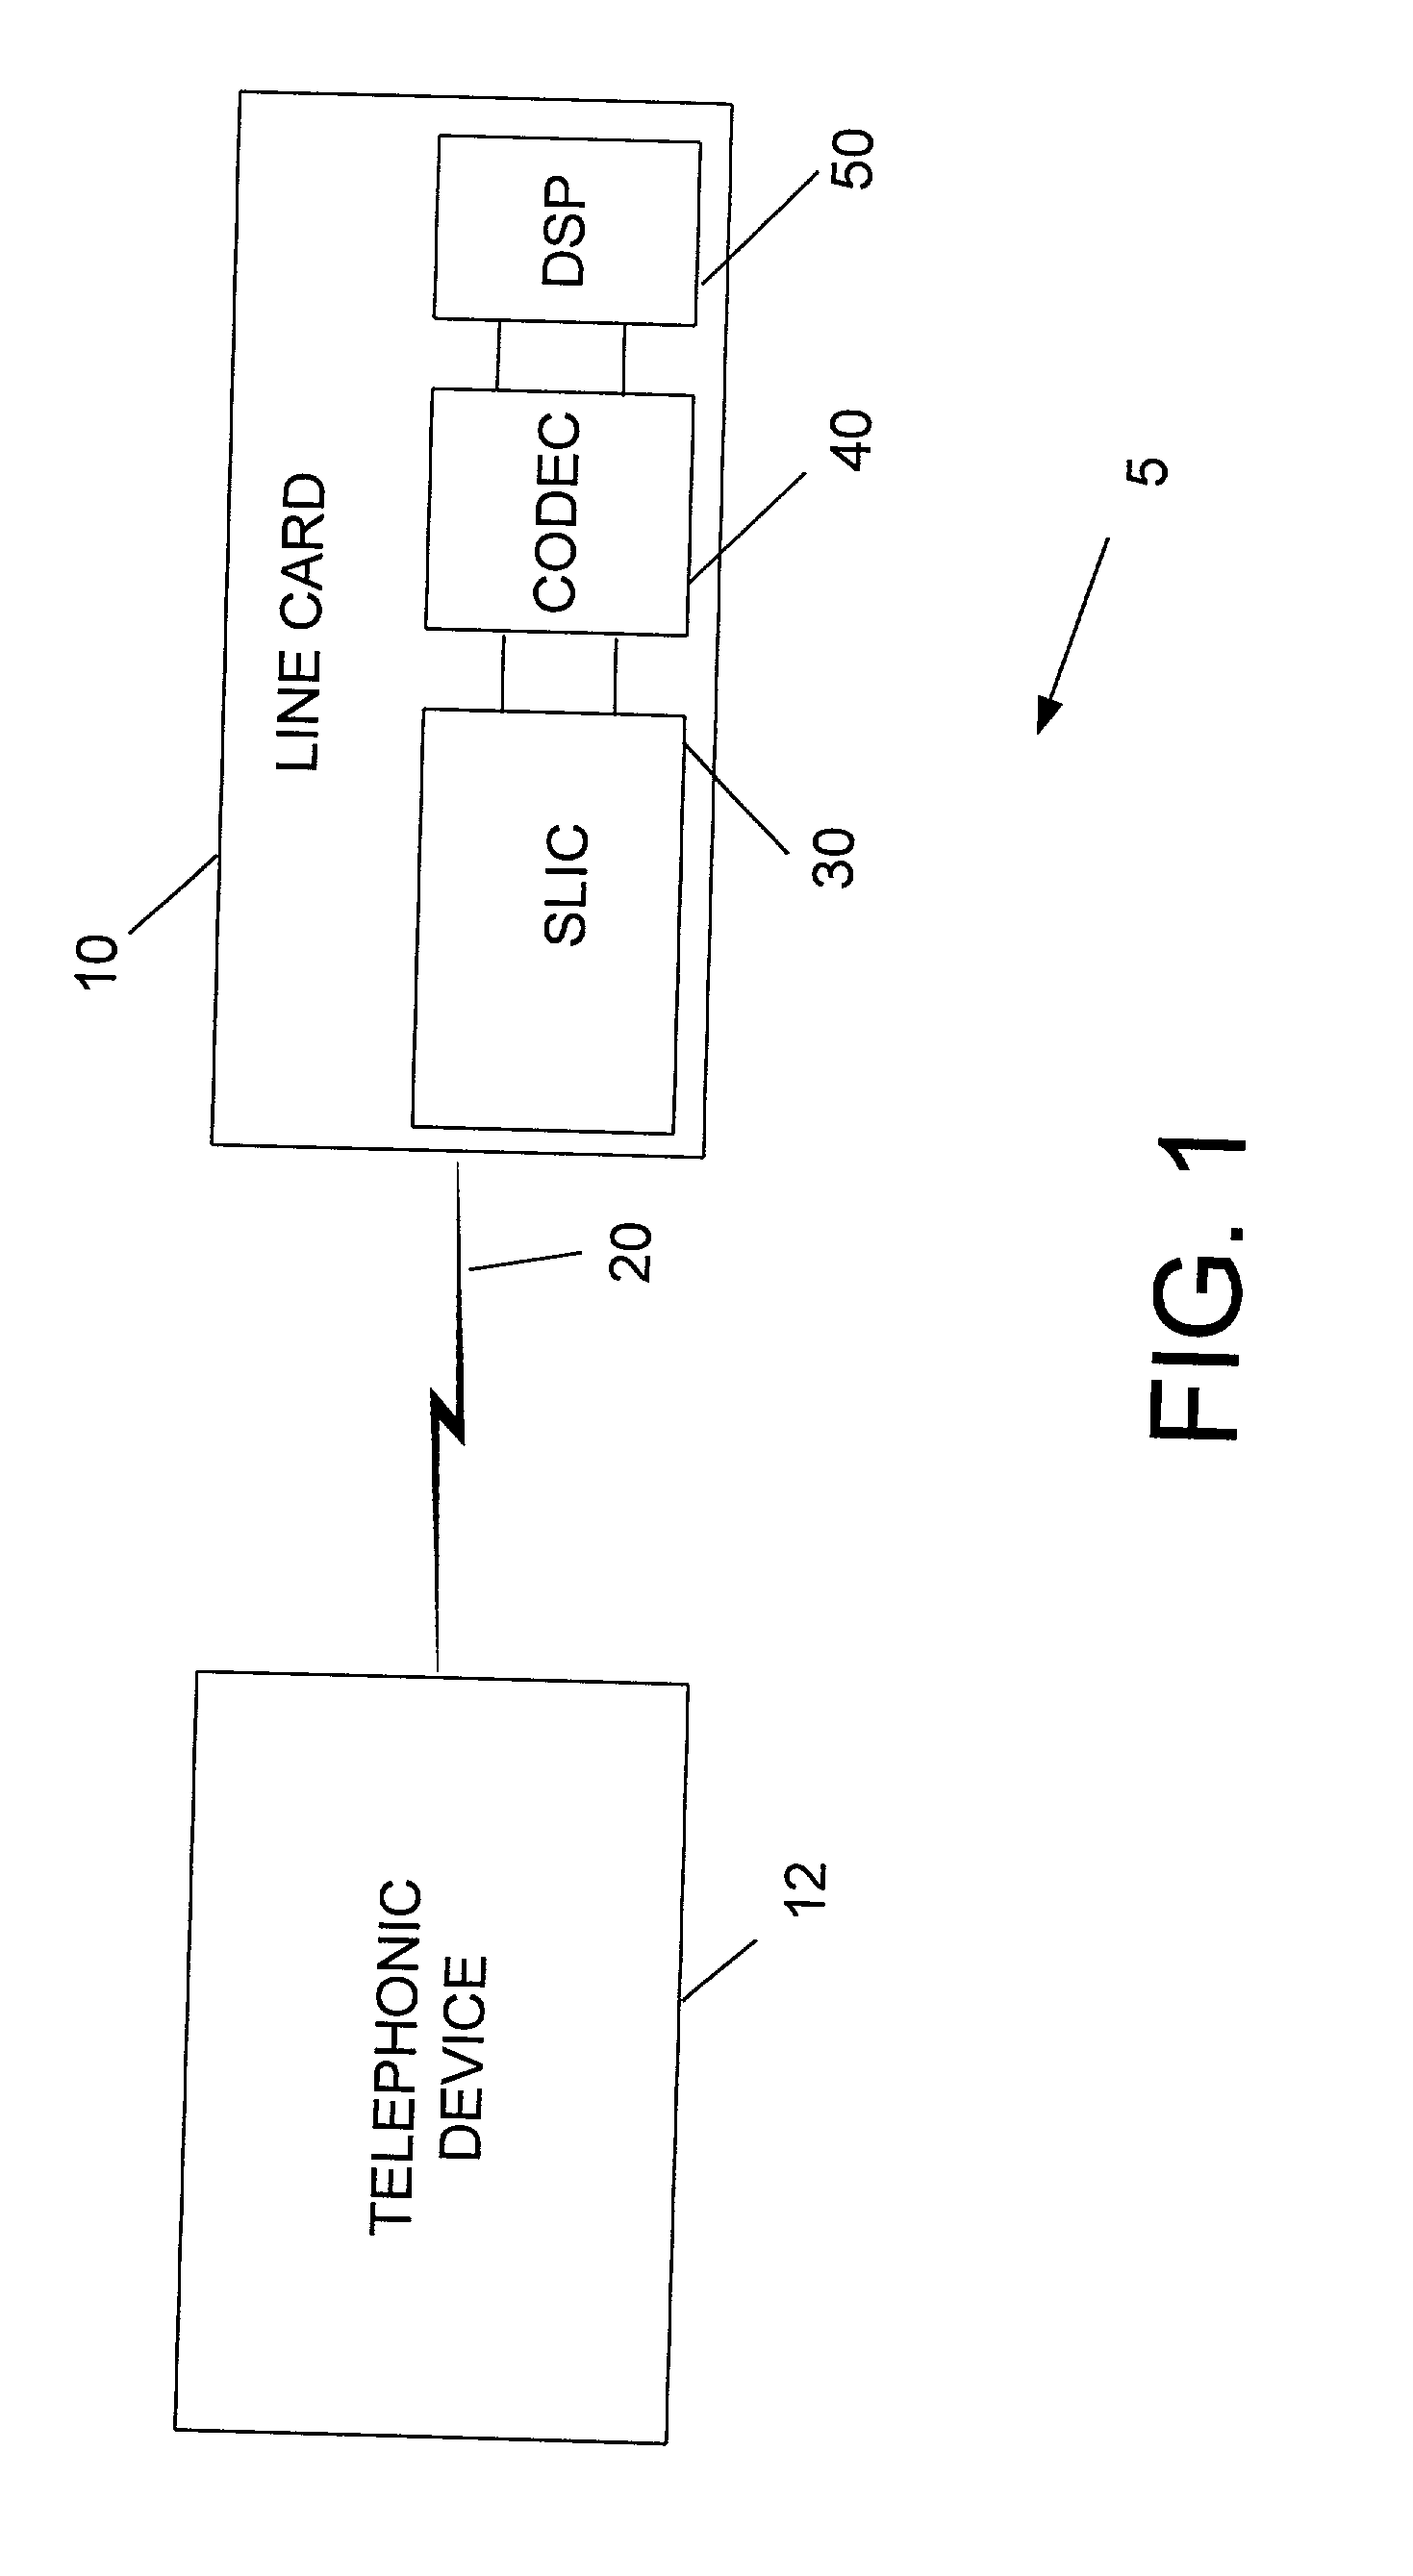 Method and apparatus for adaptive DC level control